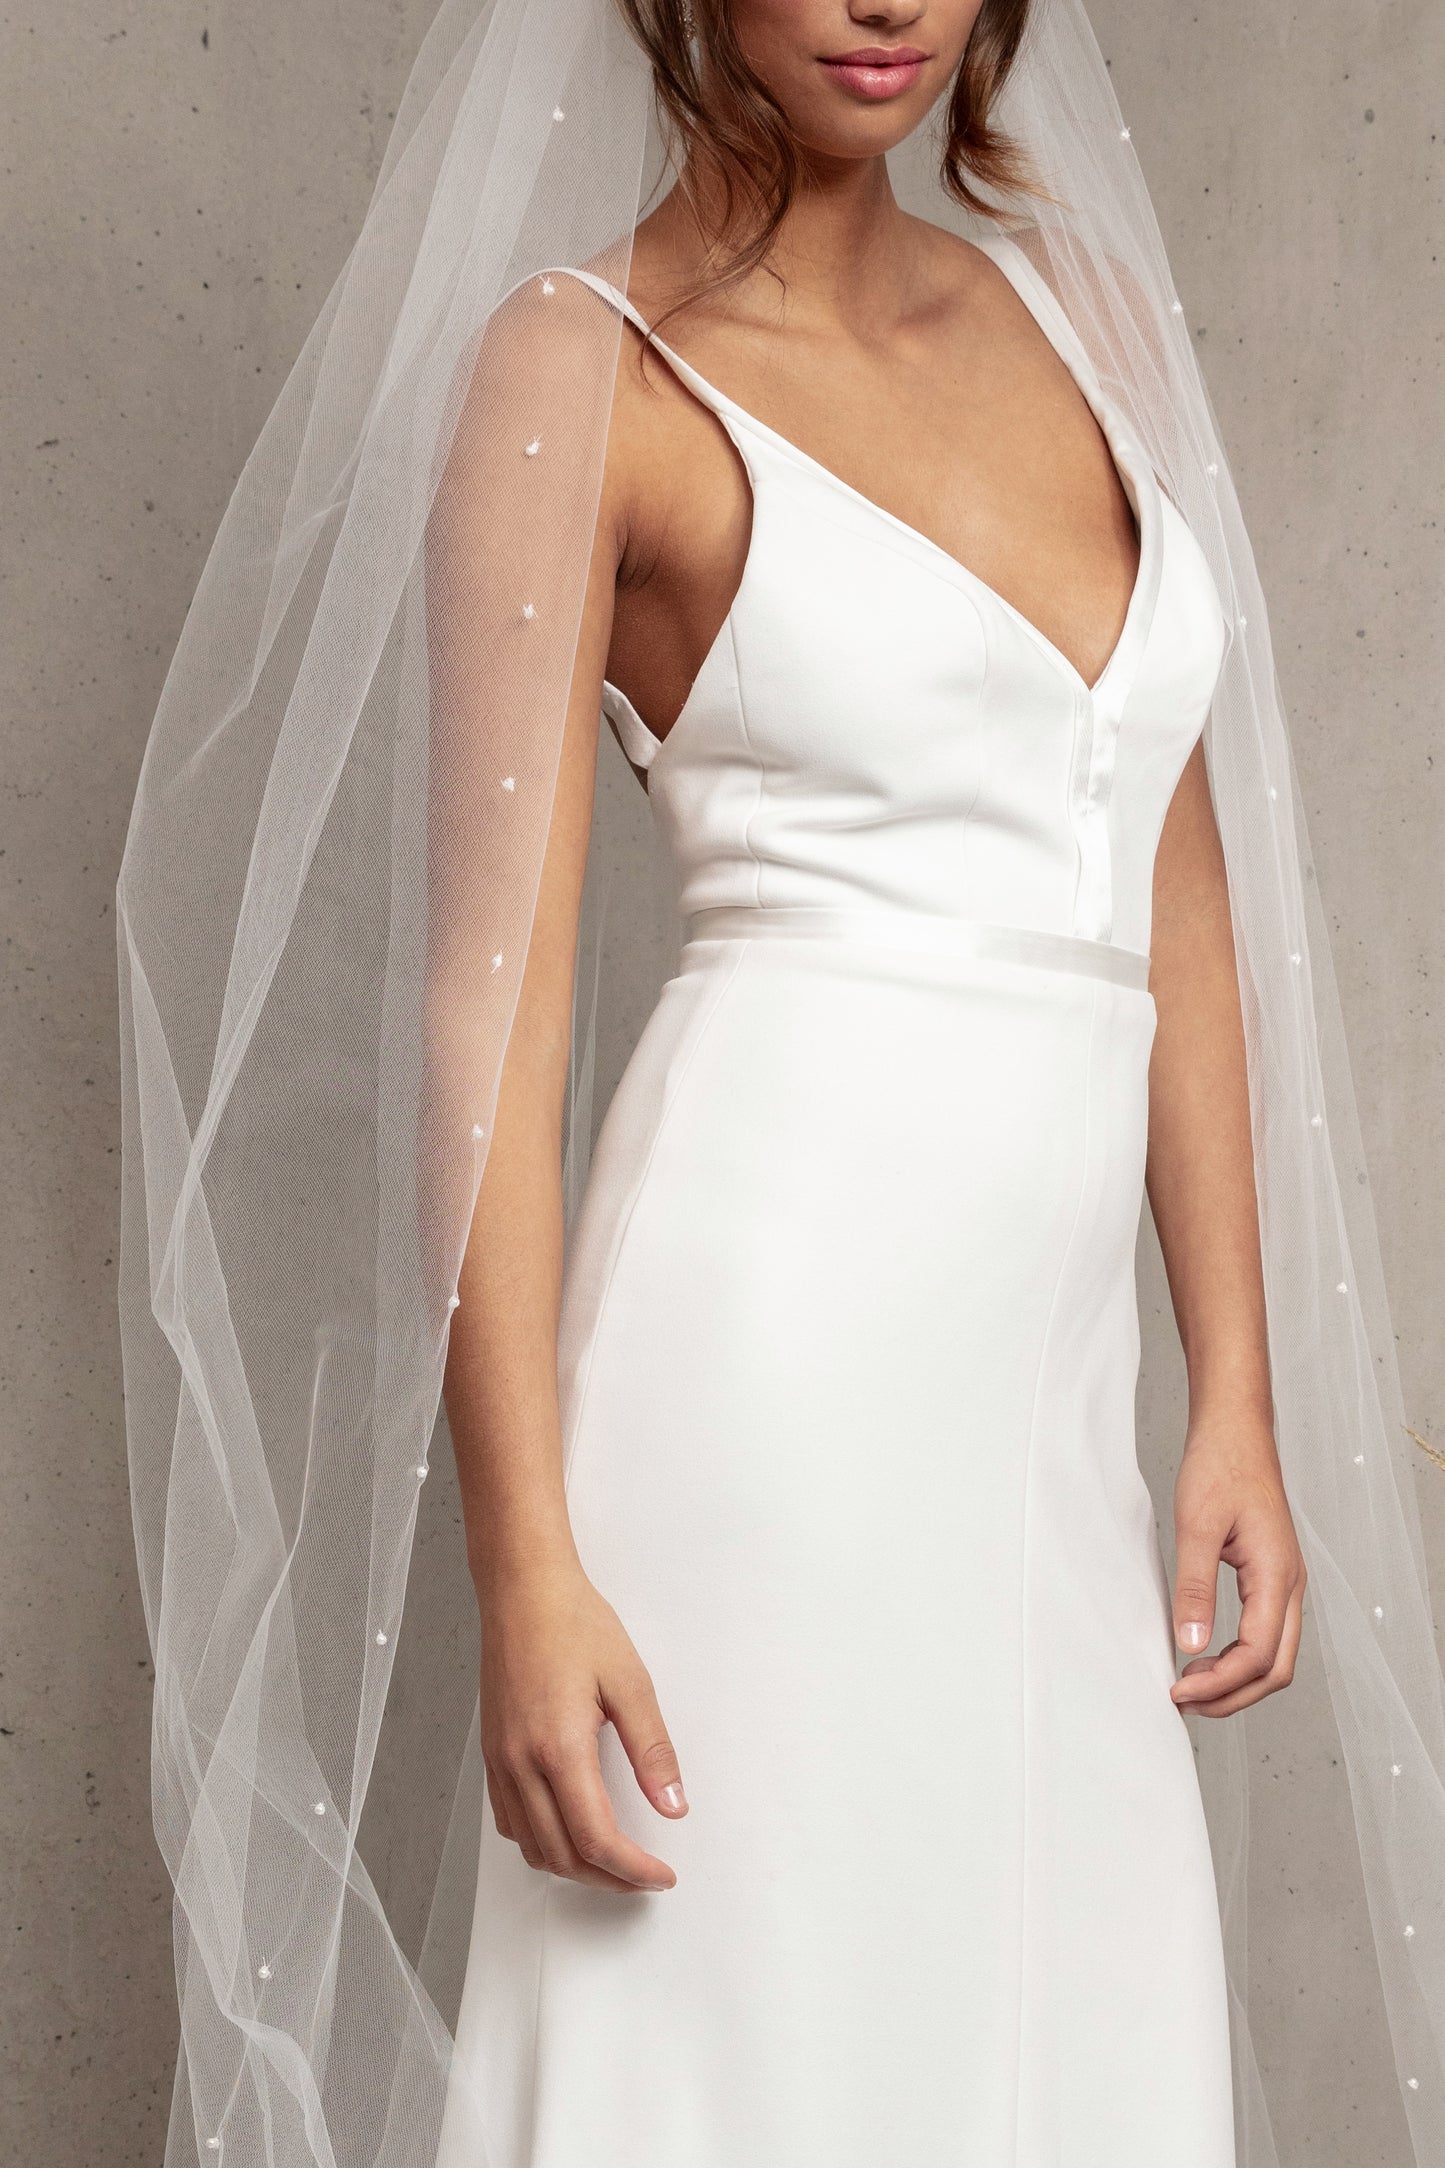 Complete your wedding look with our simply elegant MAJA VEIL. This classic piece features a delicately placed pearl edge in a linear pattern finished with voluminous gathering at the crown. Make a statement in the popular cathedral length or choose from shoulder, elbow, fingertip, floor, chapel, and royal lengths..